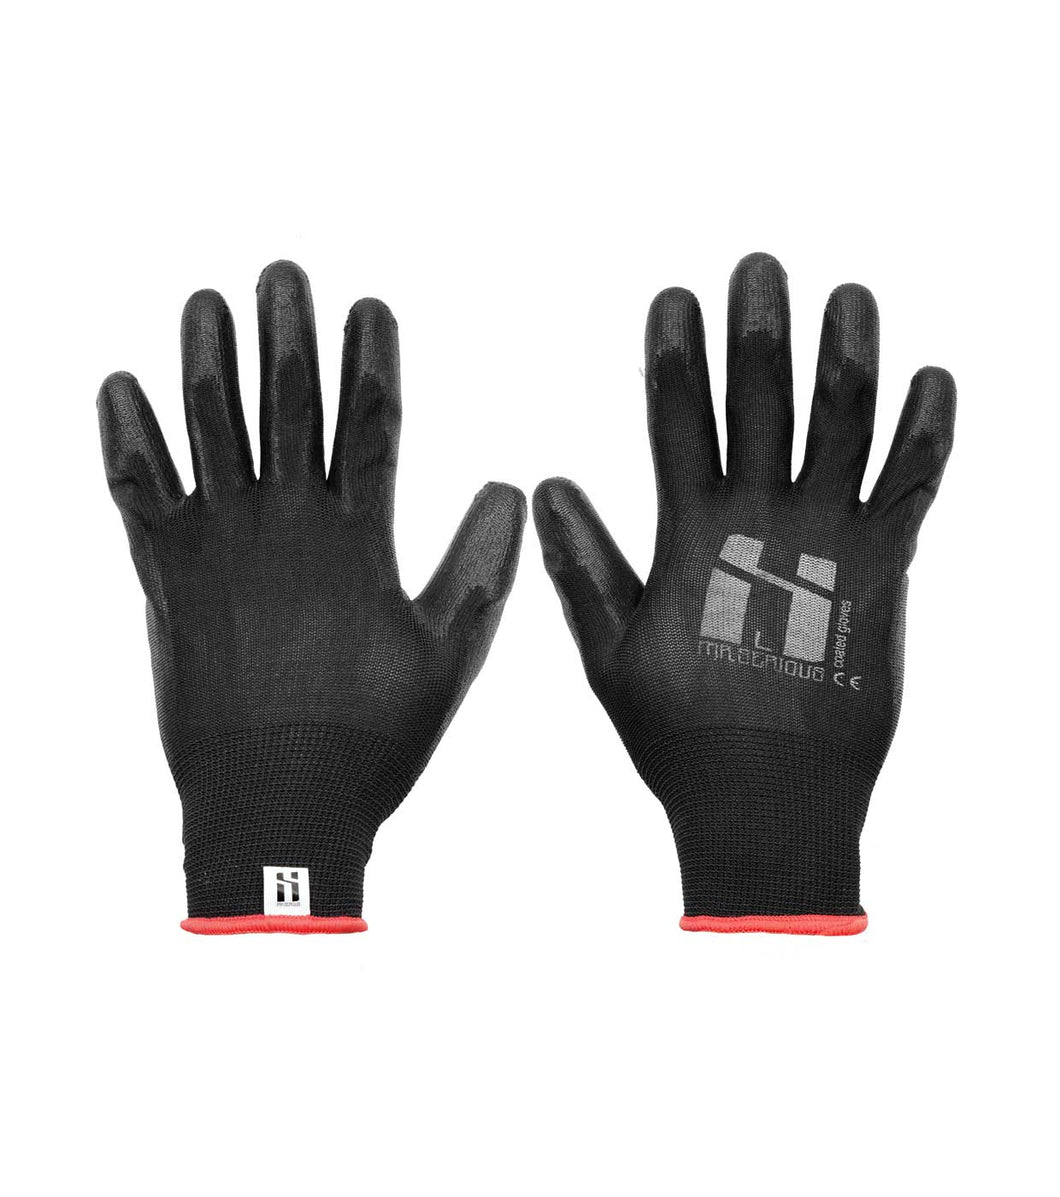 Mr. Serious - PU Coated Gloves